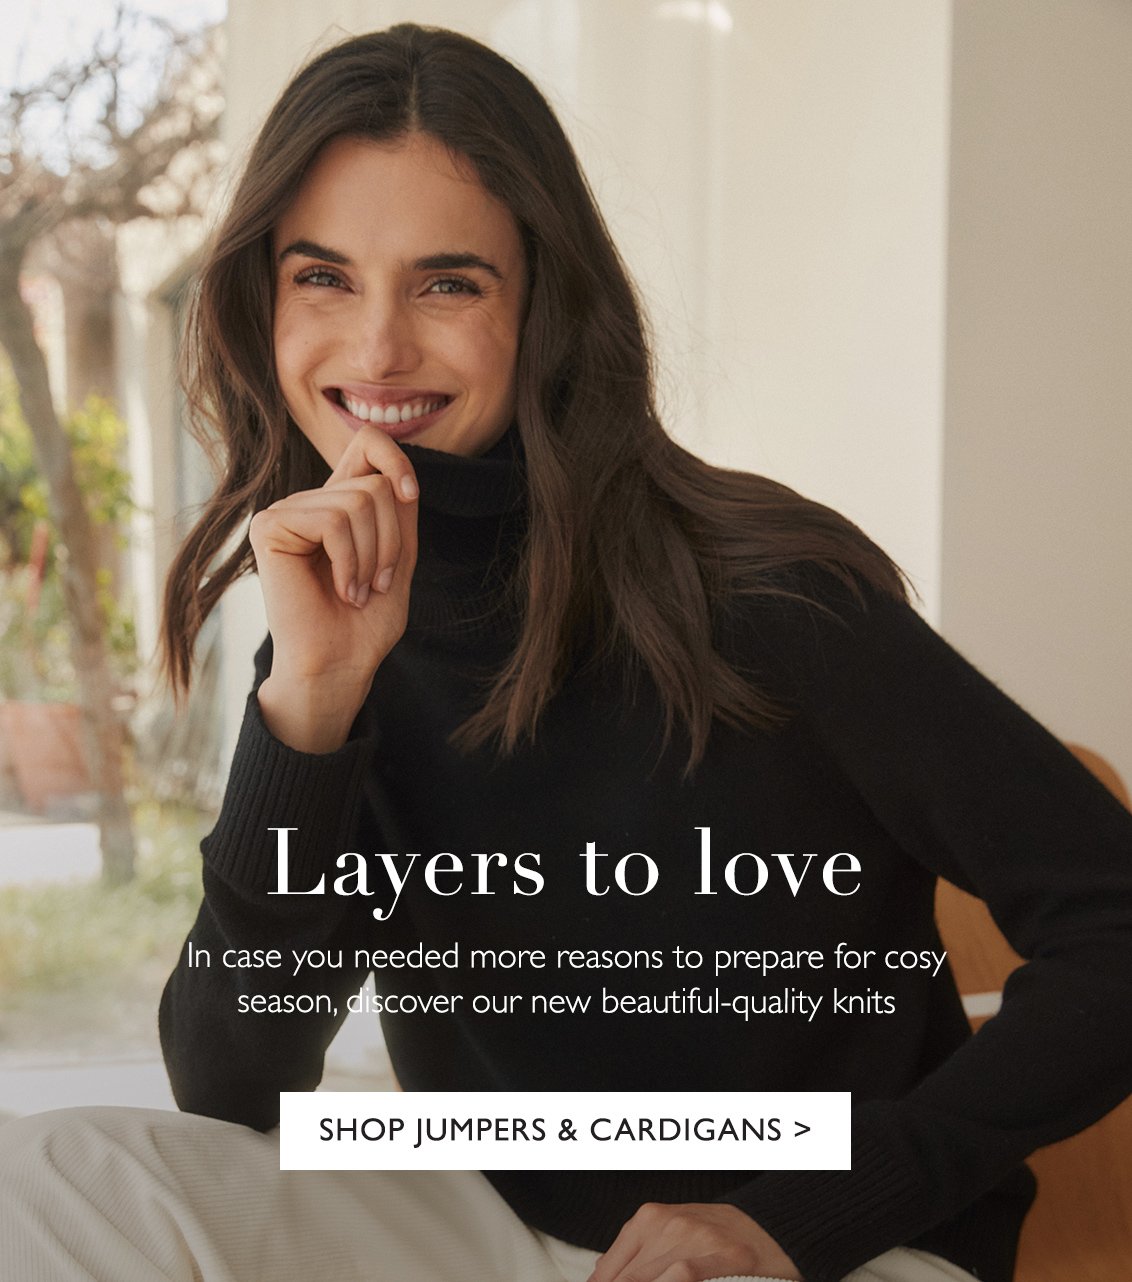 Layers to love | SHOP JUMPERS & CARDIGANS